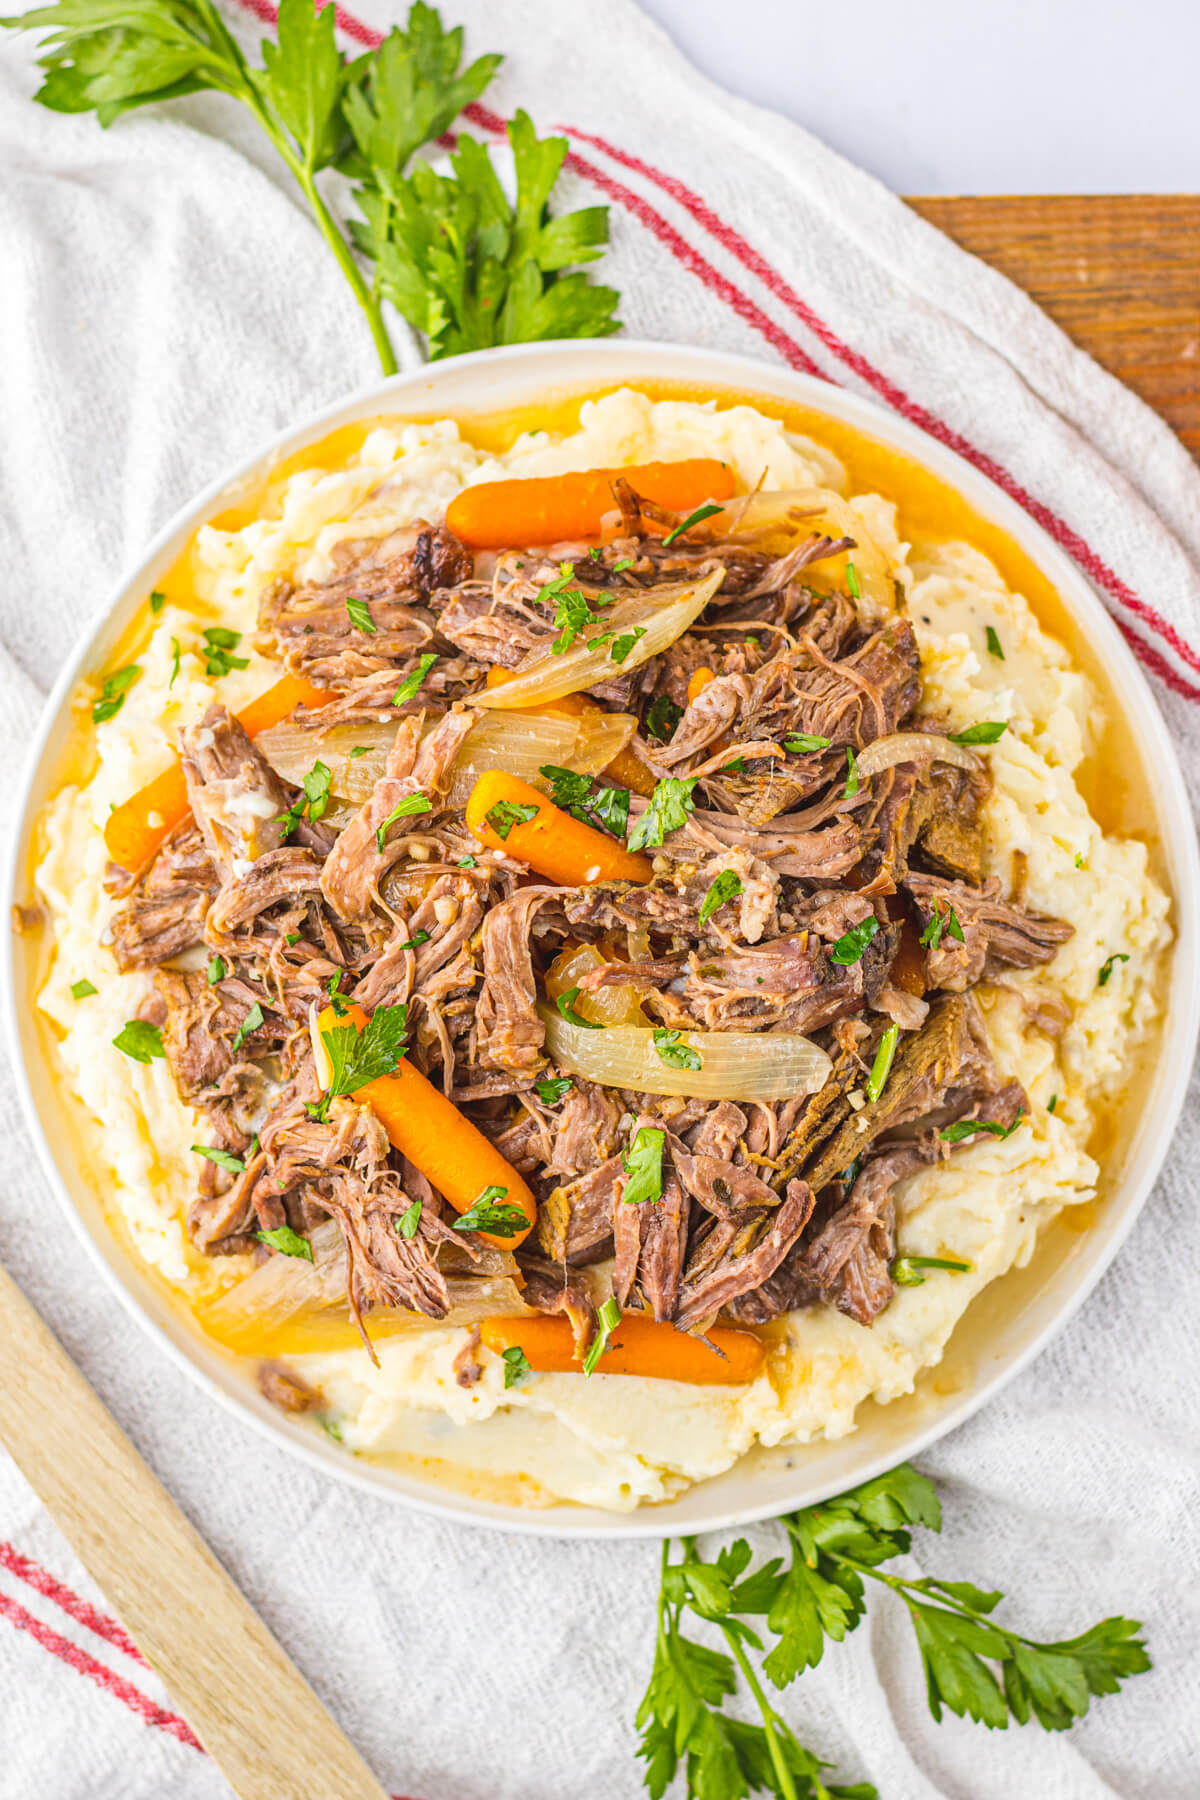 A plate full of shredded crock pot chuck roast, carrots, and onions on a bed of creamy mashed potatoes.